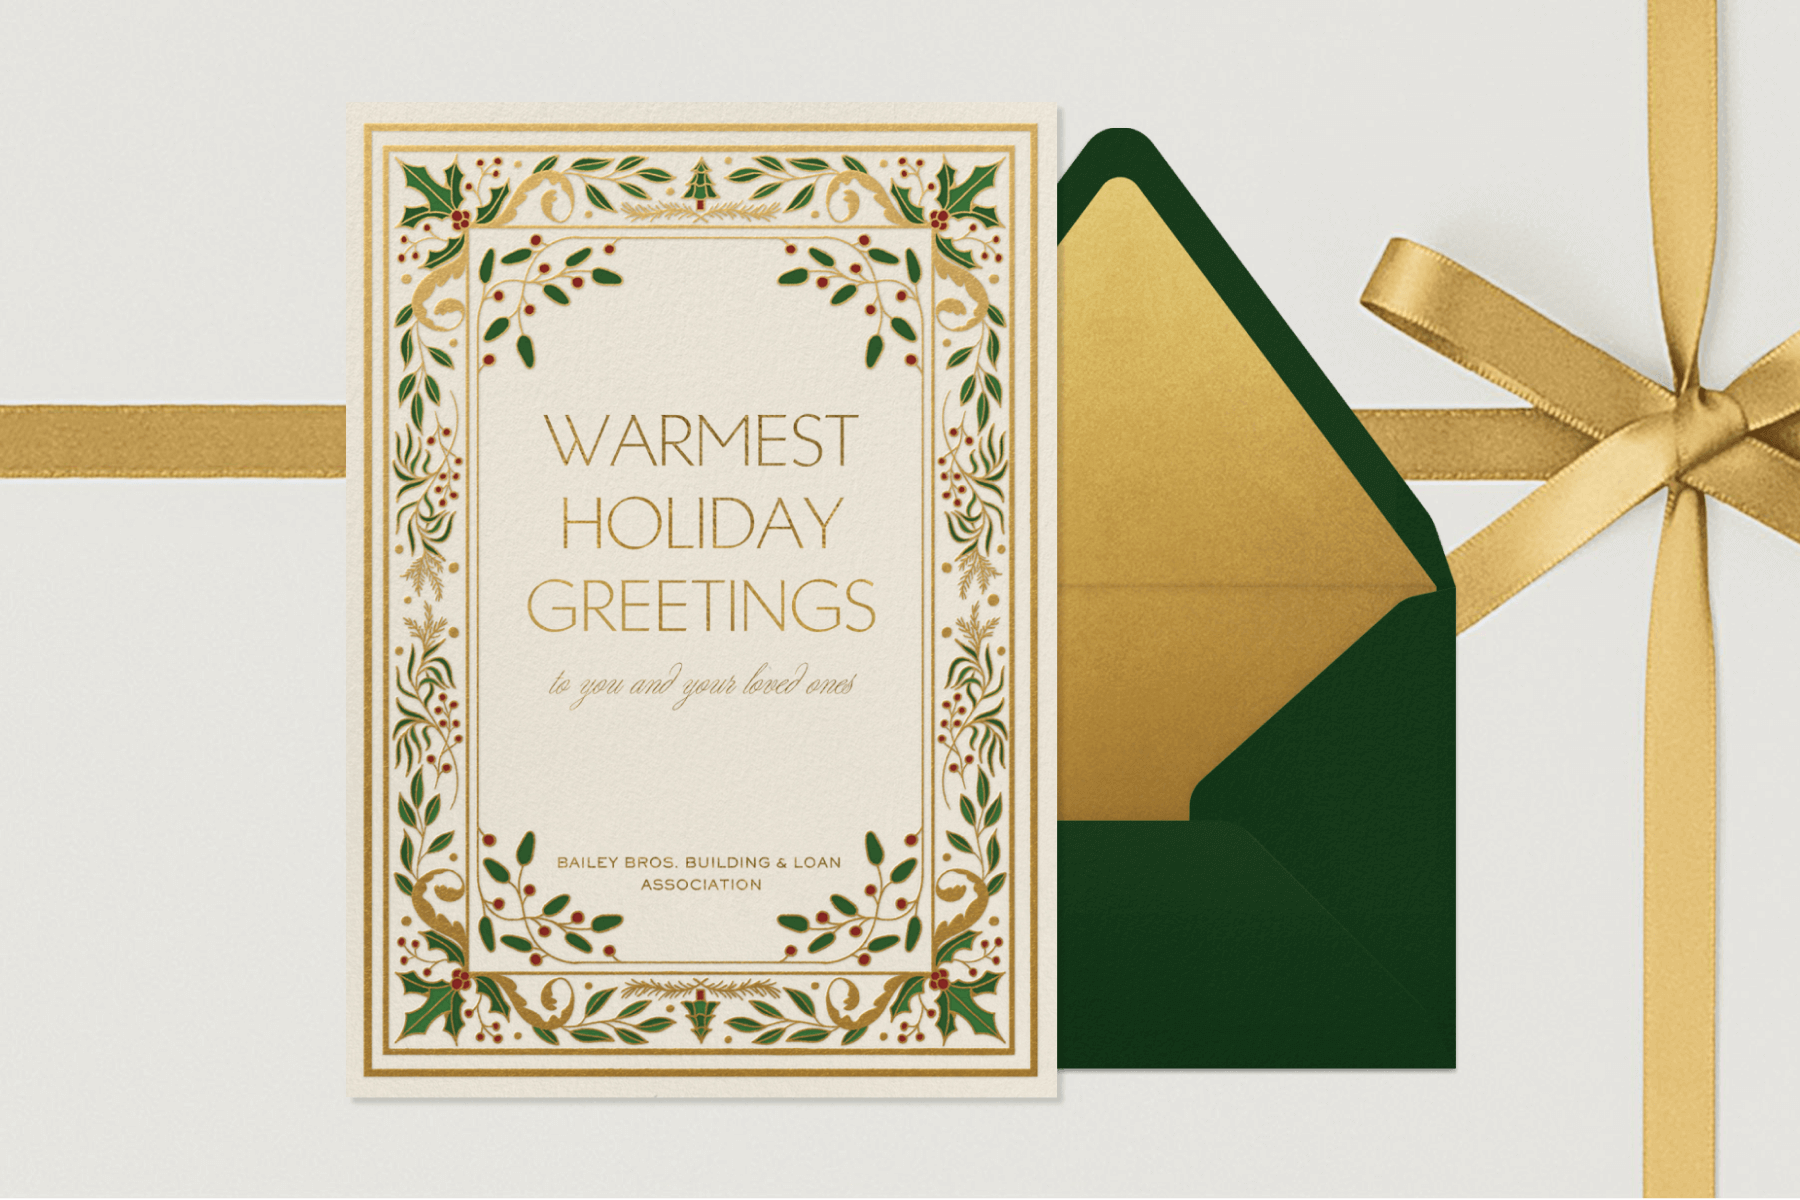 A holiday card with ornate gold and holly leaf border beside a green envelope with gold liner on a background with a gold ribbon bow.